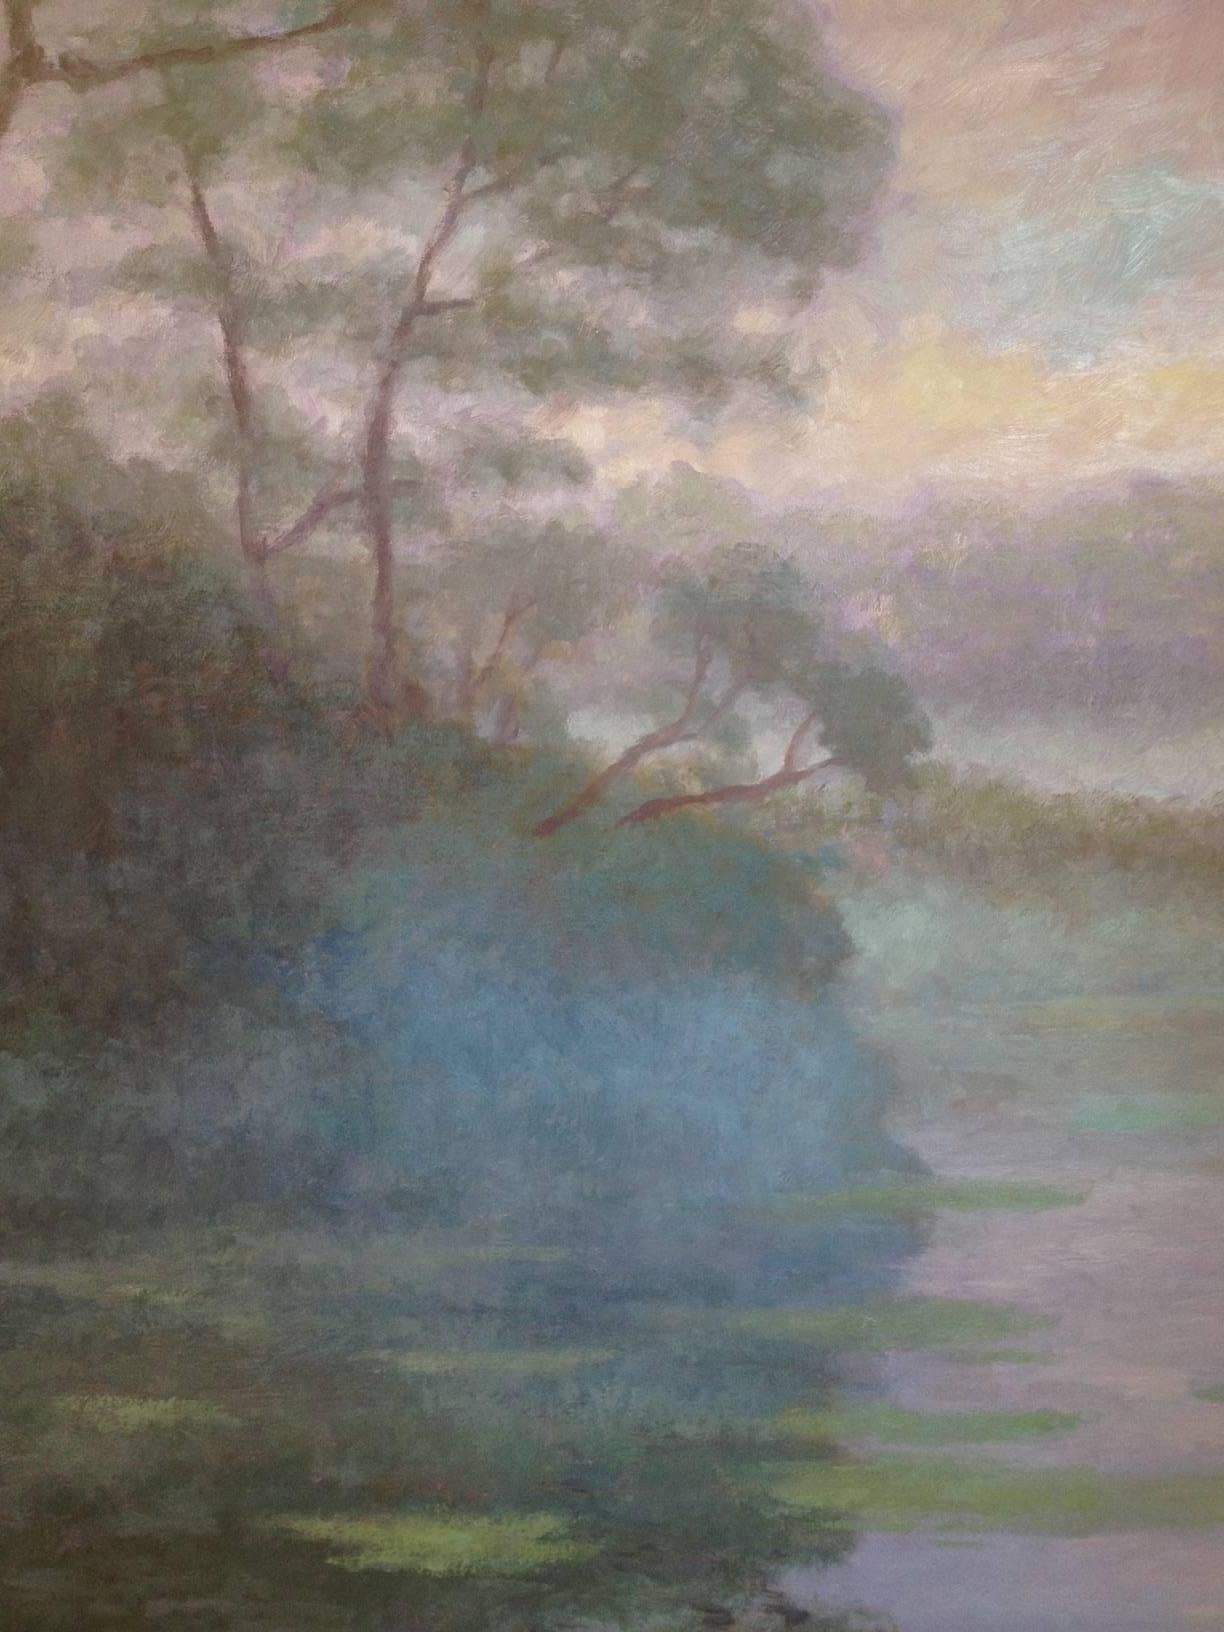 Rising mist - Painting by Robert Longley